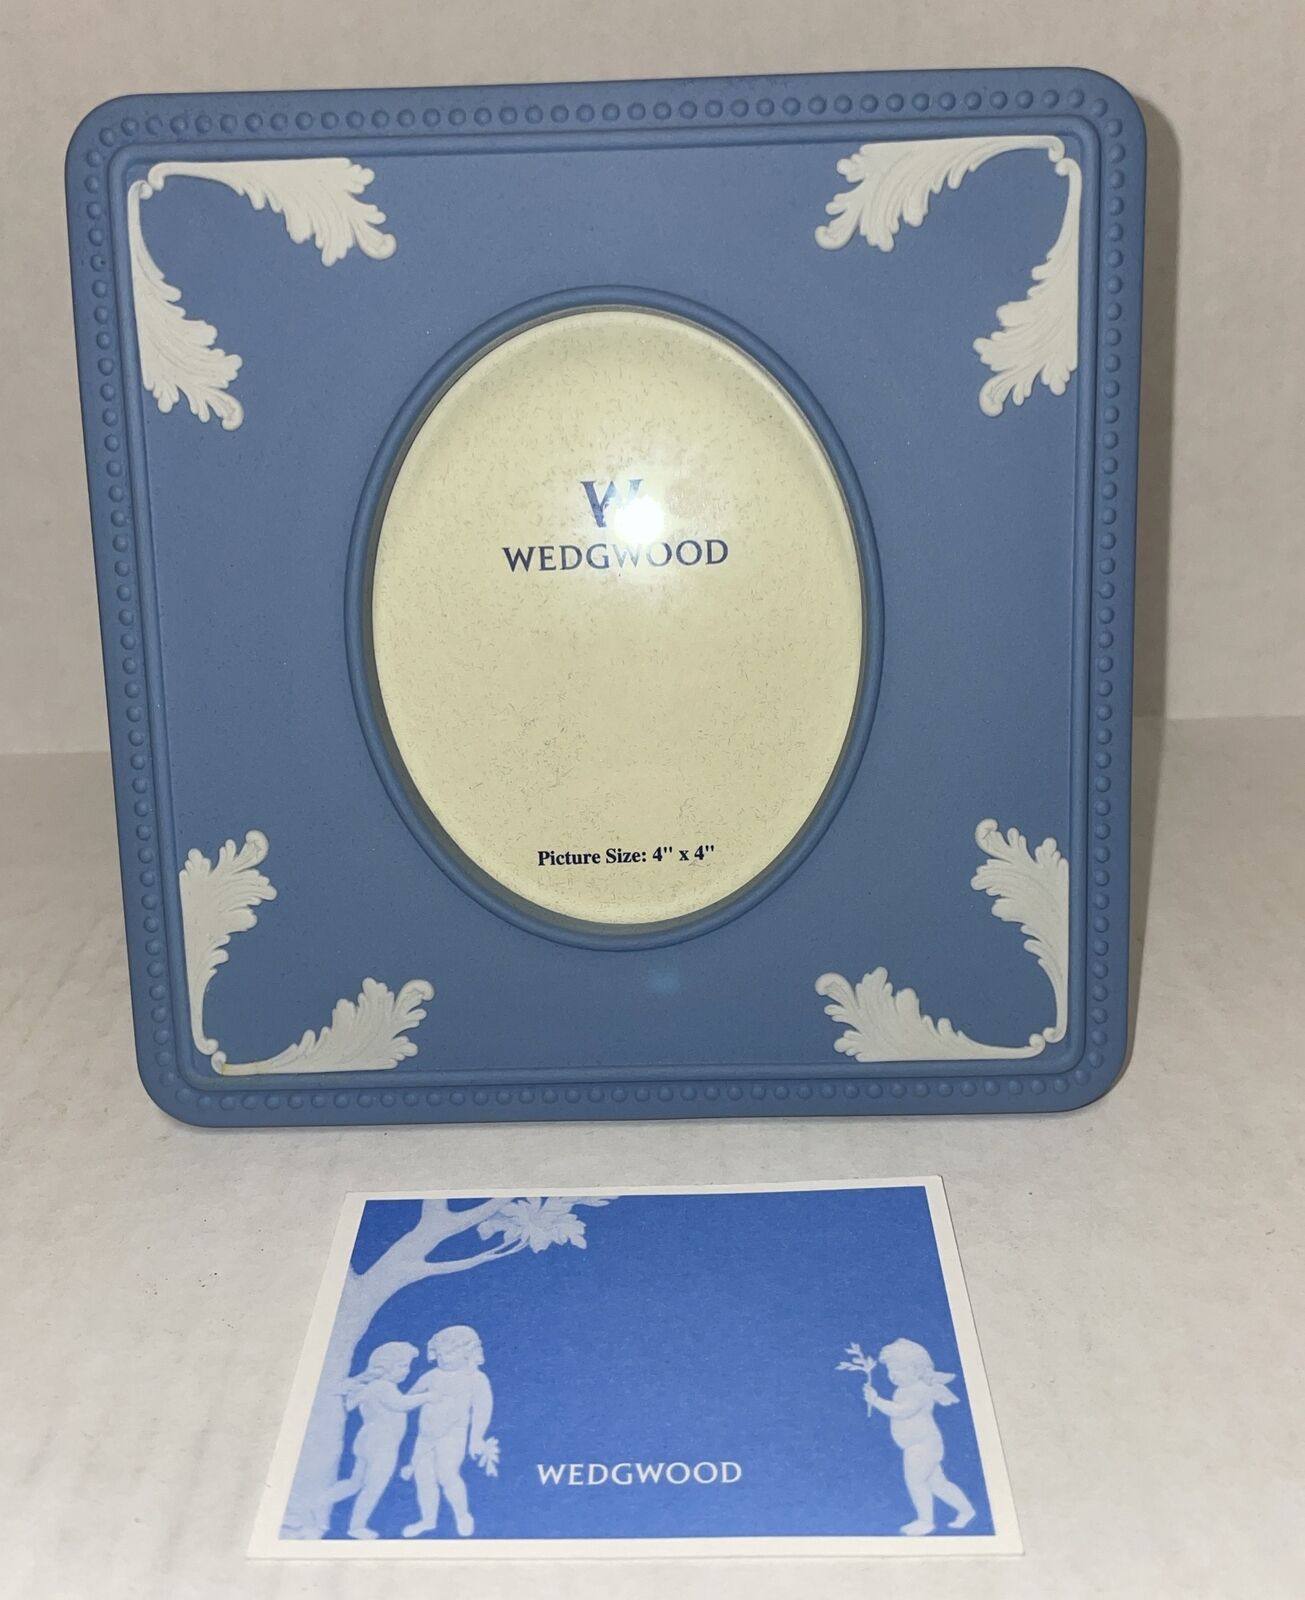 NWT VTG Wedgwood Jasperware Picture Frame Pale Blue /Square With Oval Center UK